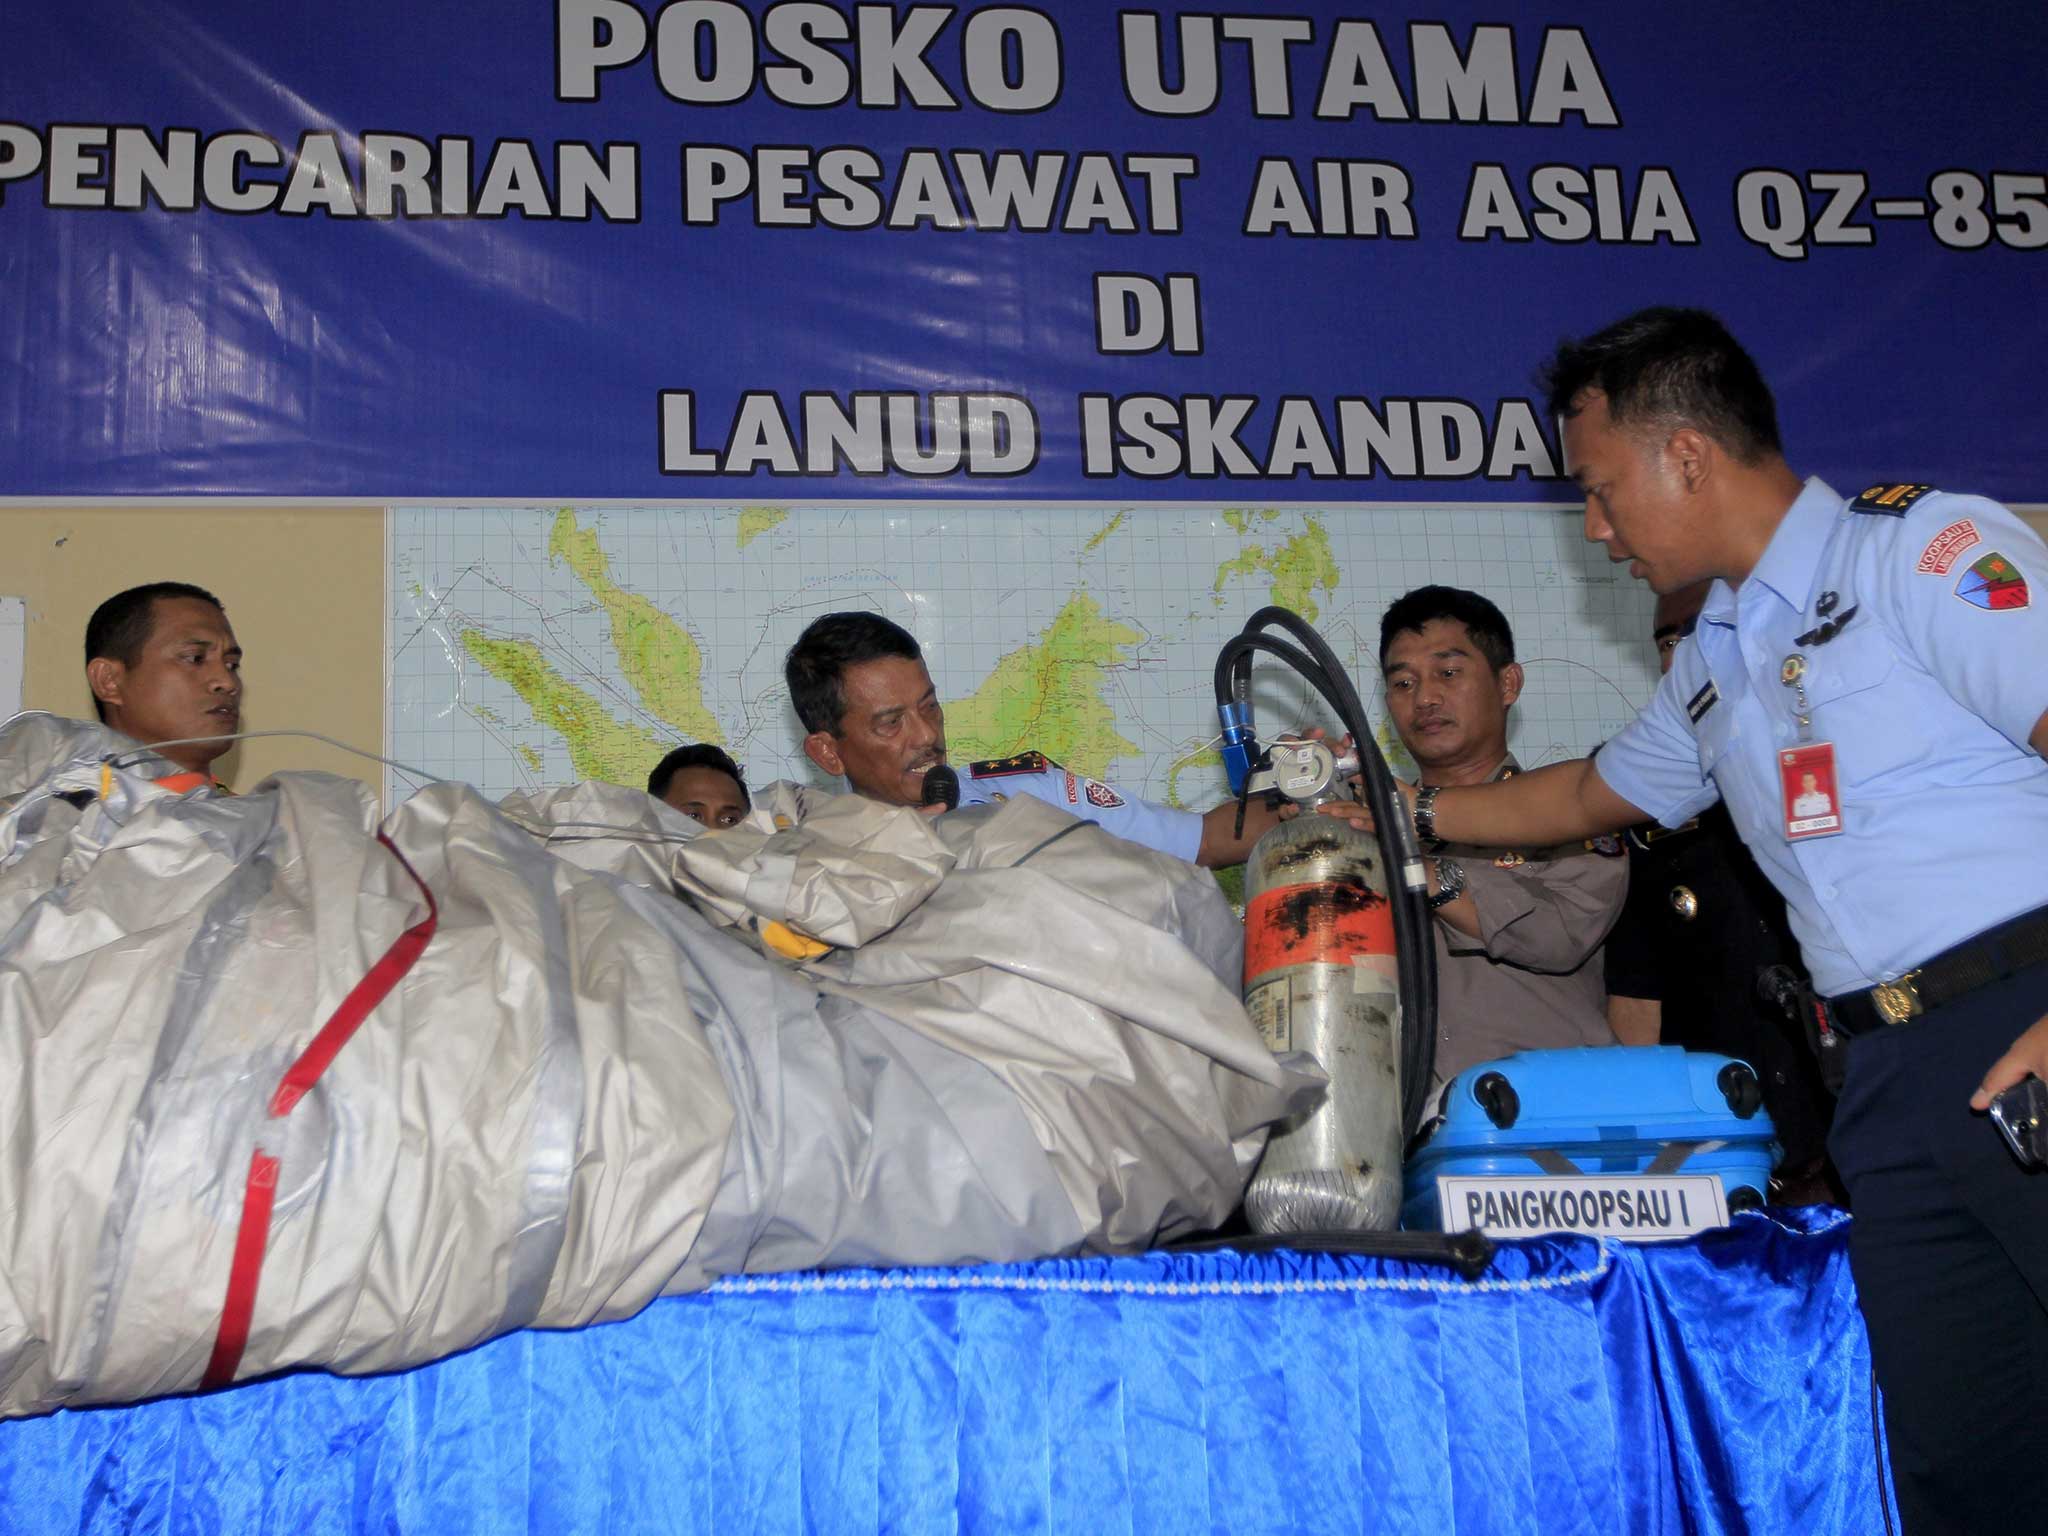 akarta's Air Force base commander Rear Marshal Dwi Putranto (C) and Indonesian Air Force crew show pieces recovered from the wreck